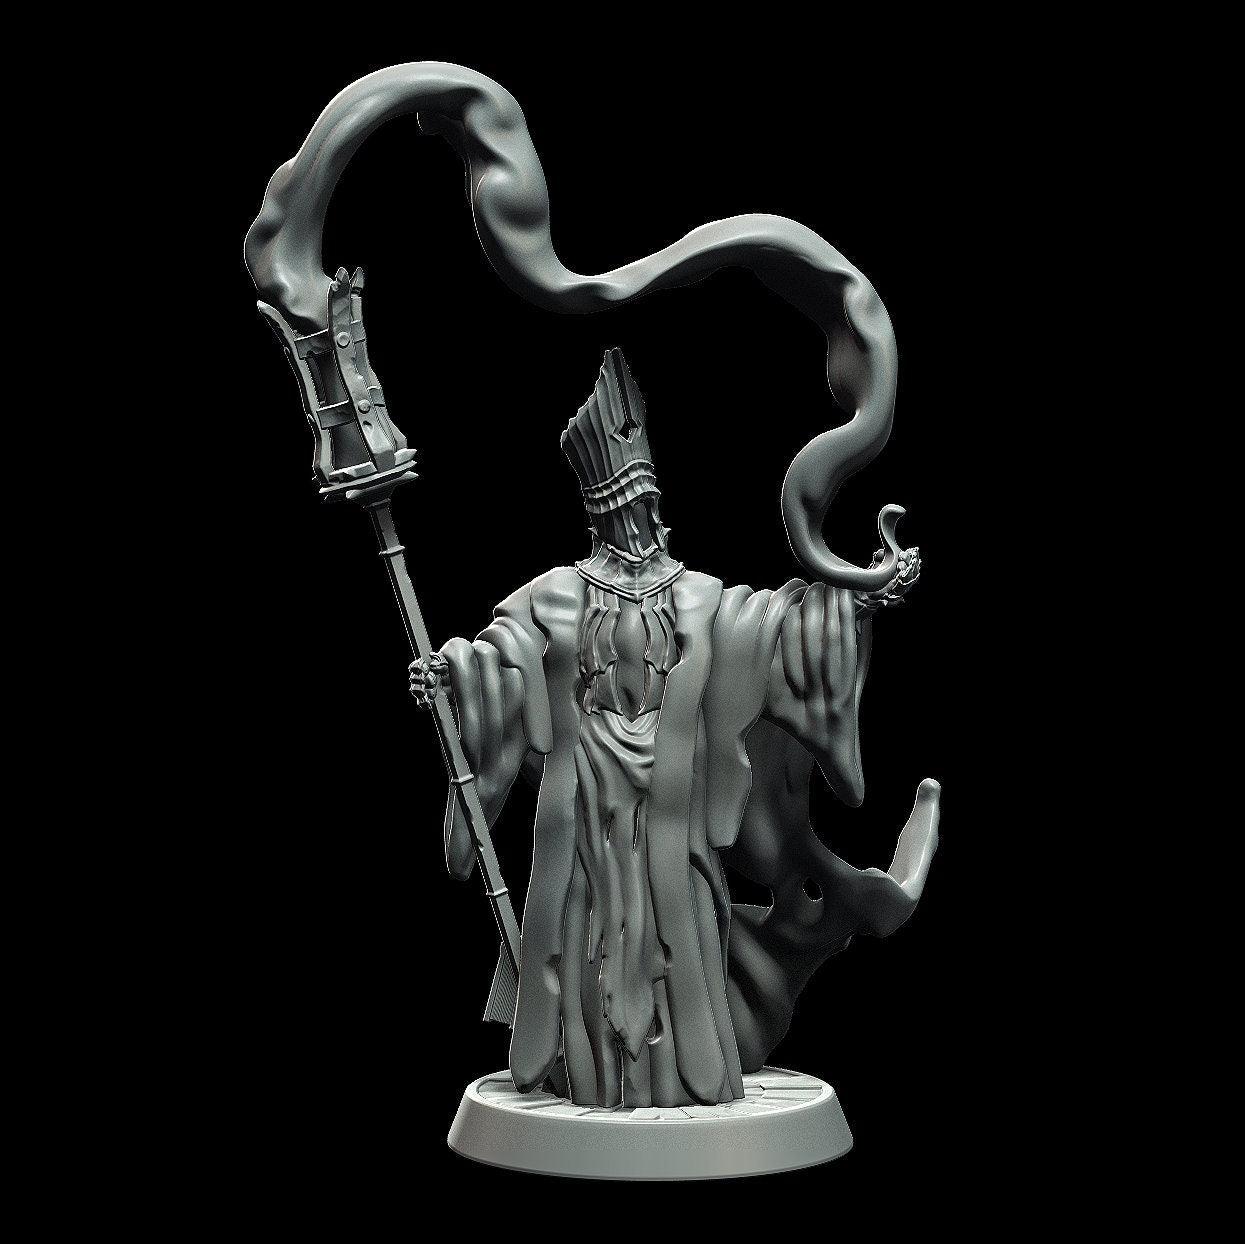 Insane Cleric Miniature witch miniature - 3 Poses - 28mm scale Tabletop gaming DnD Miniature Dungeons and Dragons, ttrpg dnd 5e - Plague Miniatures shop for DnD Miniatures